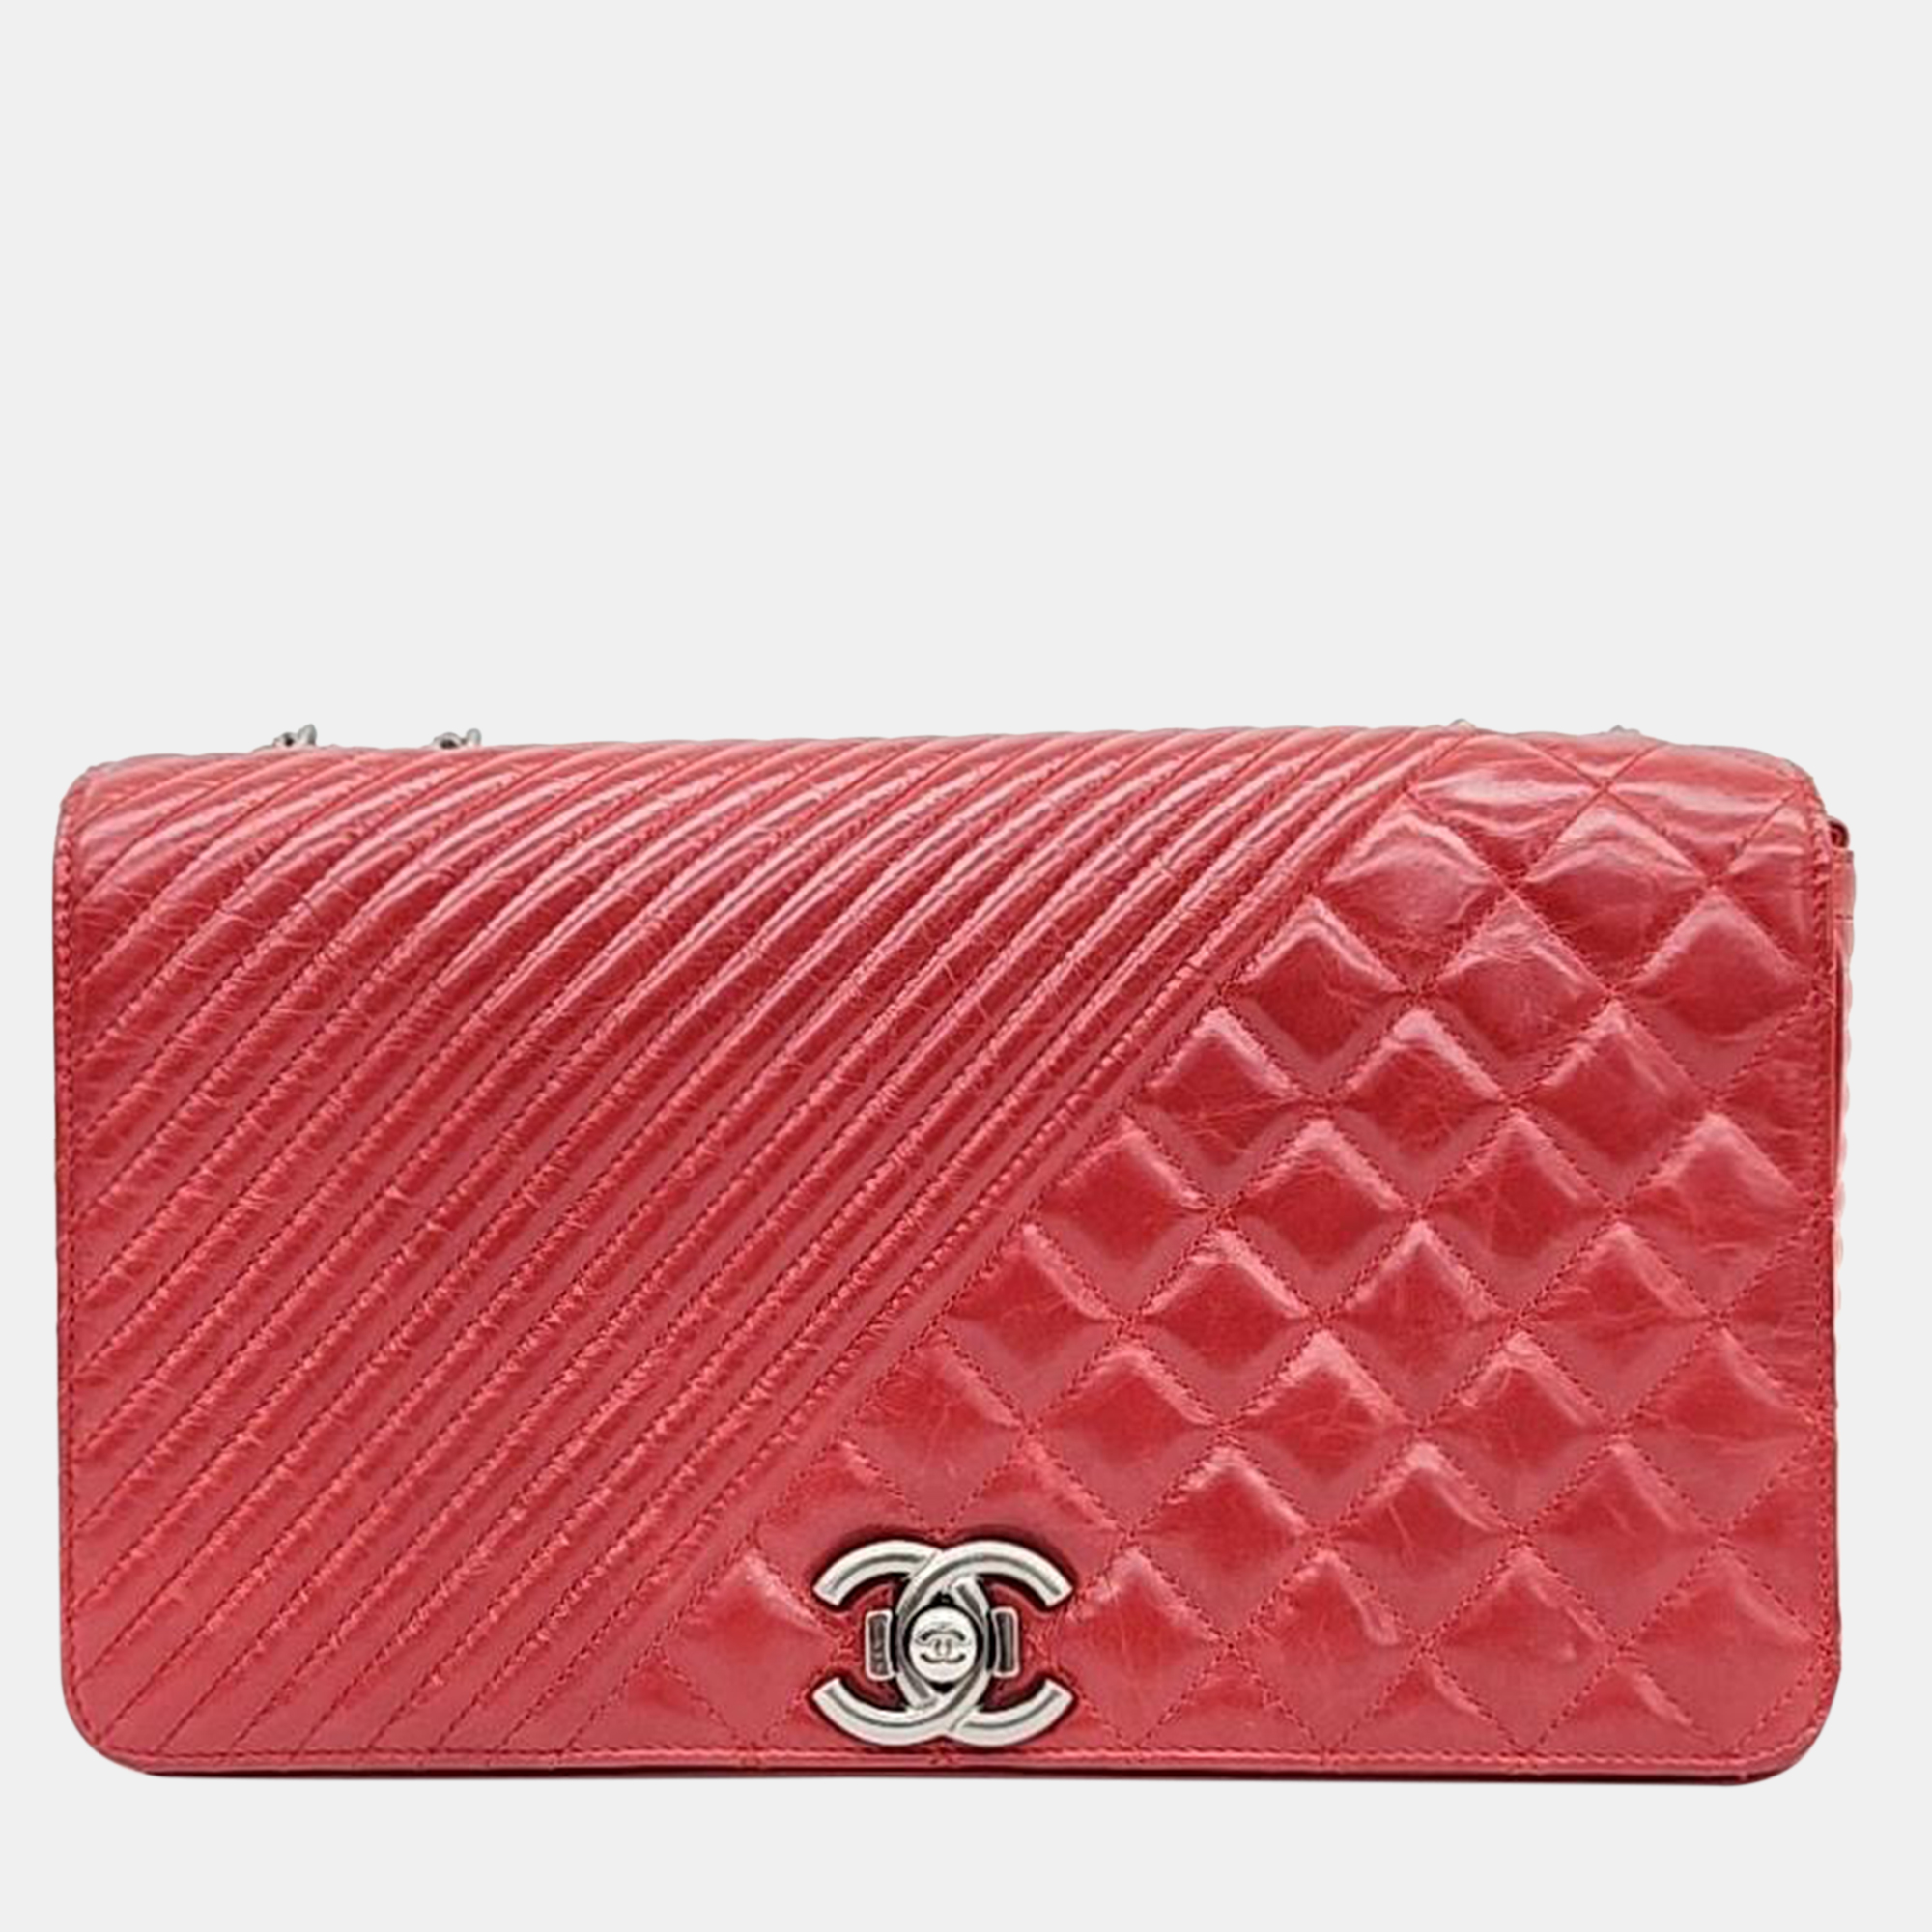 Chanel red leather chain shoulder bag